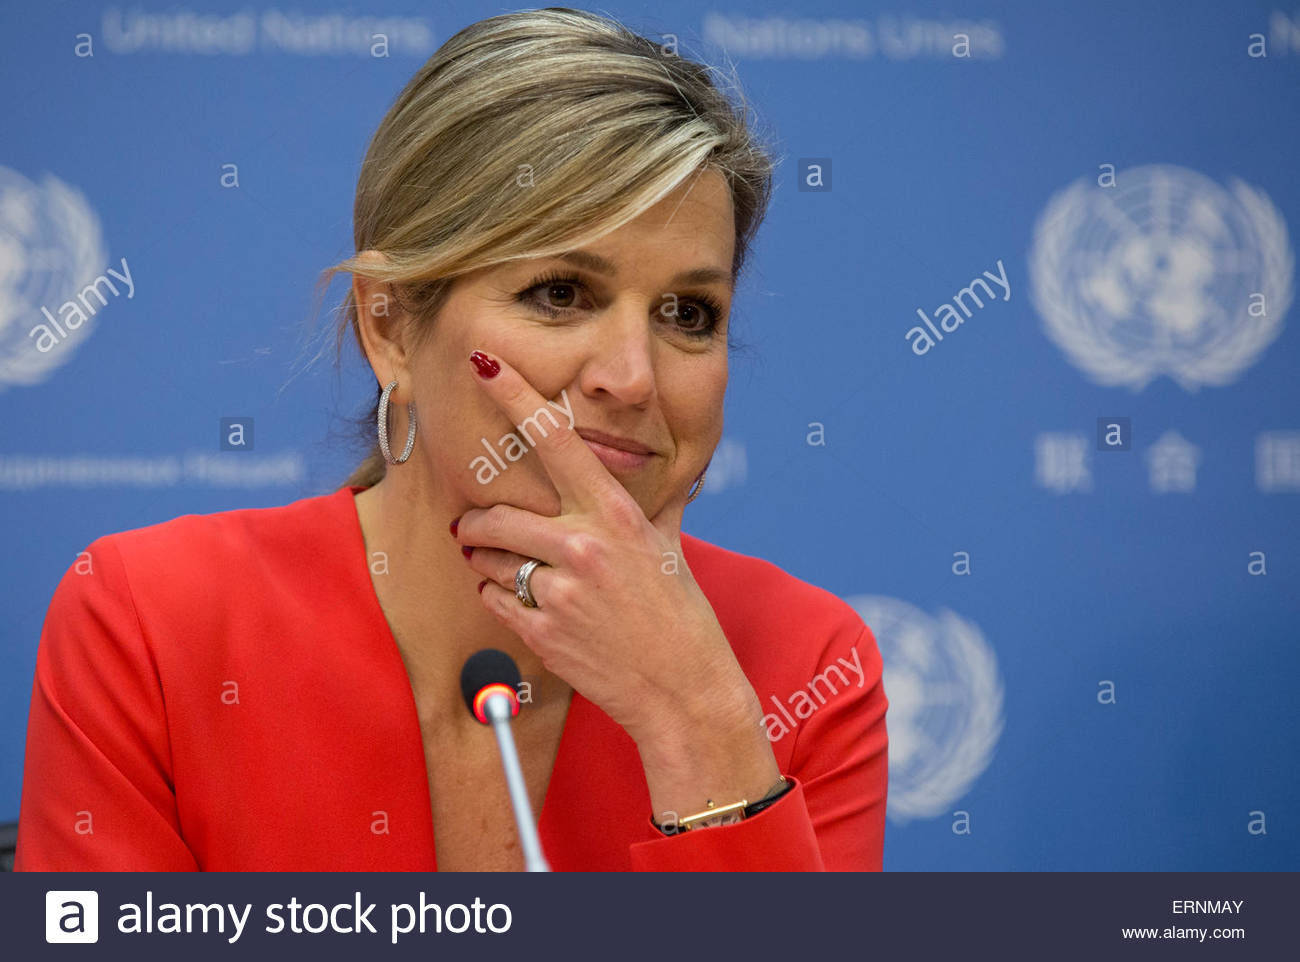 united-nations-new-york-usa-june-05-2015-queen-maxima-of-the-netherlands-ERNMAY.jpg